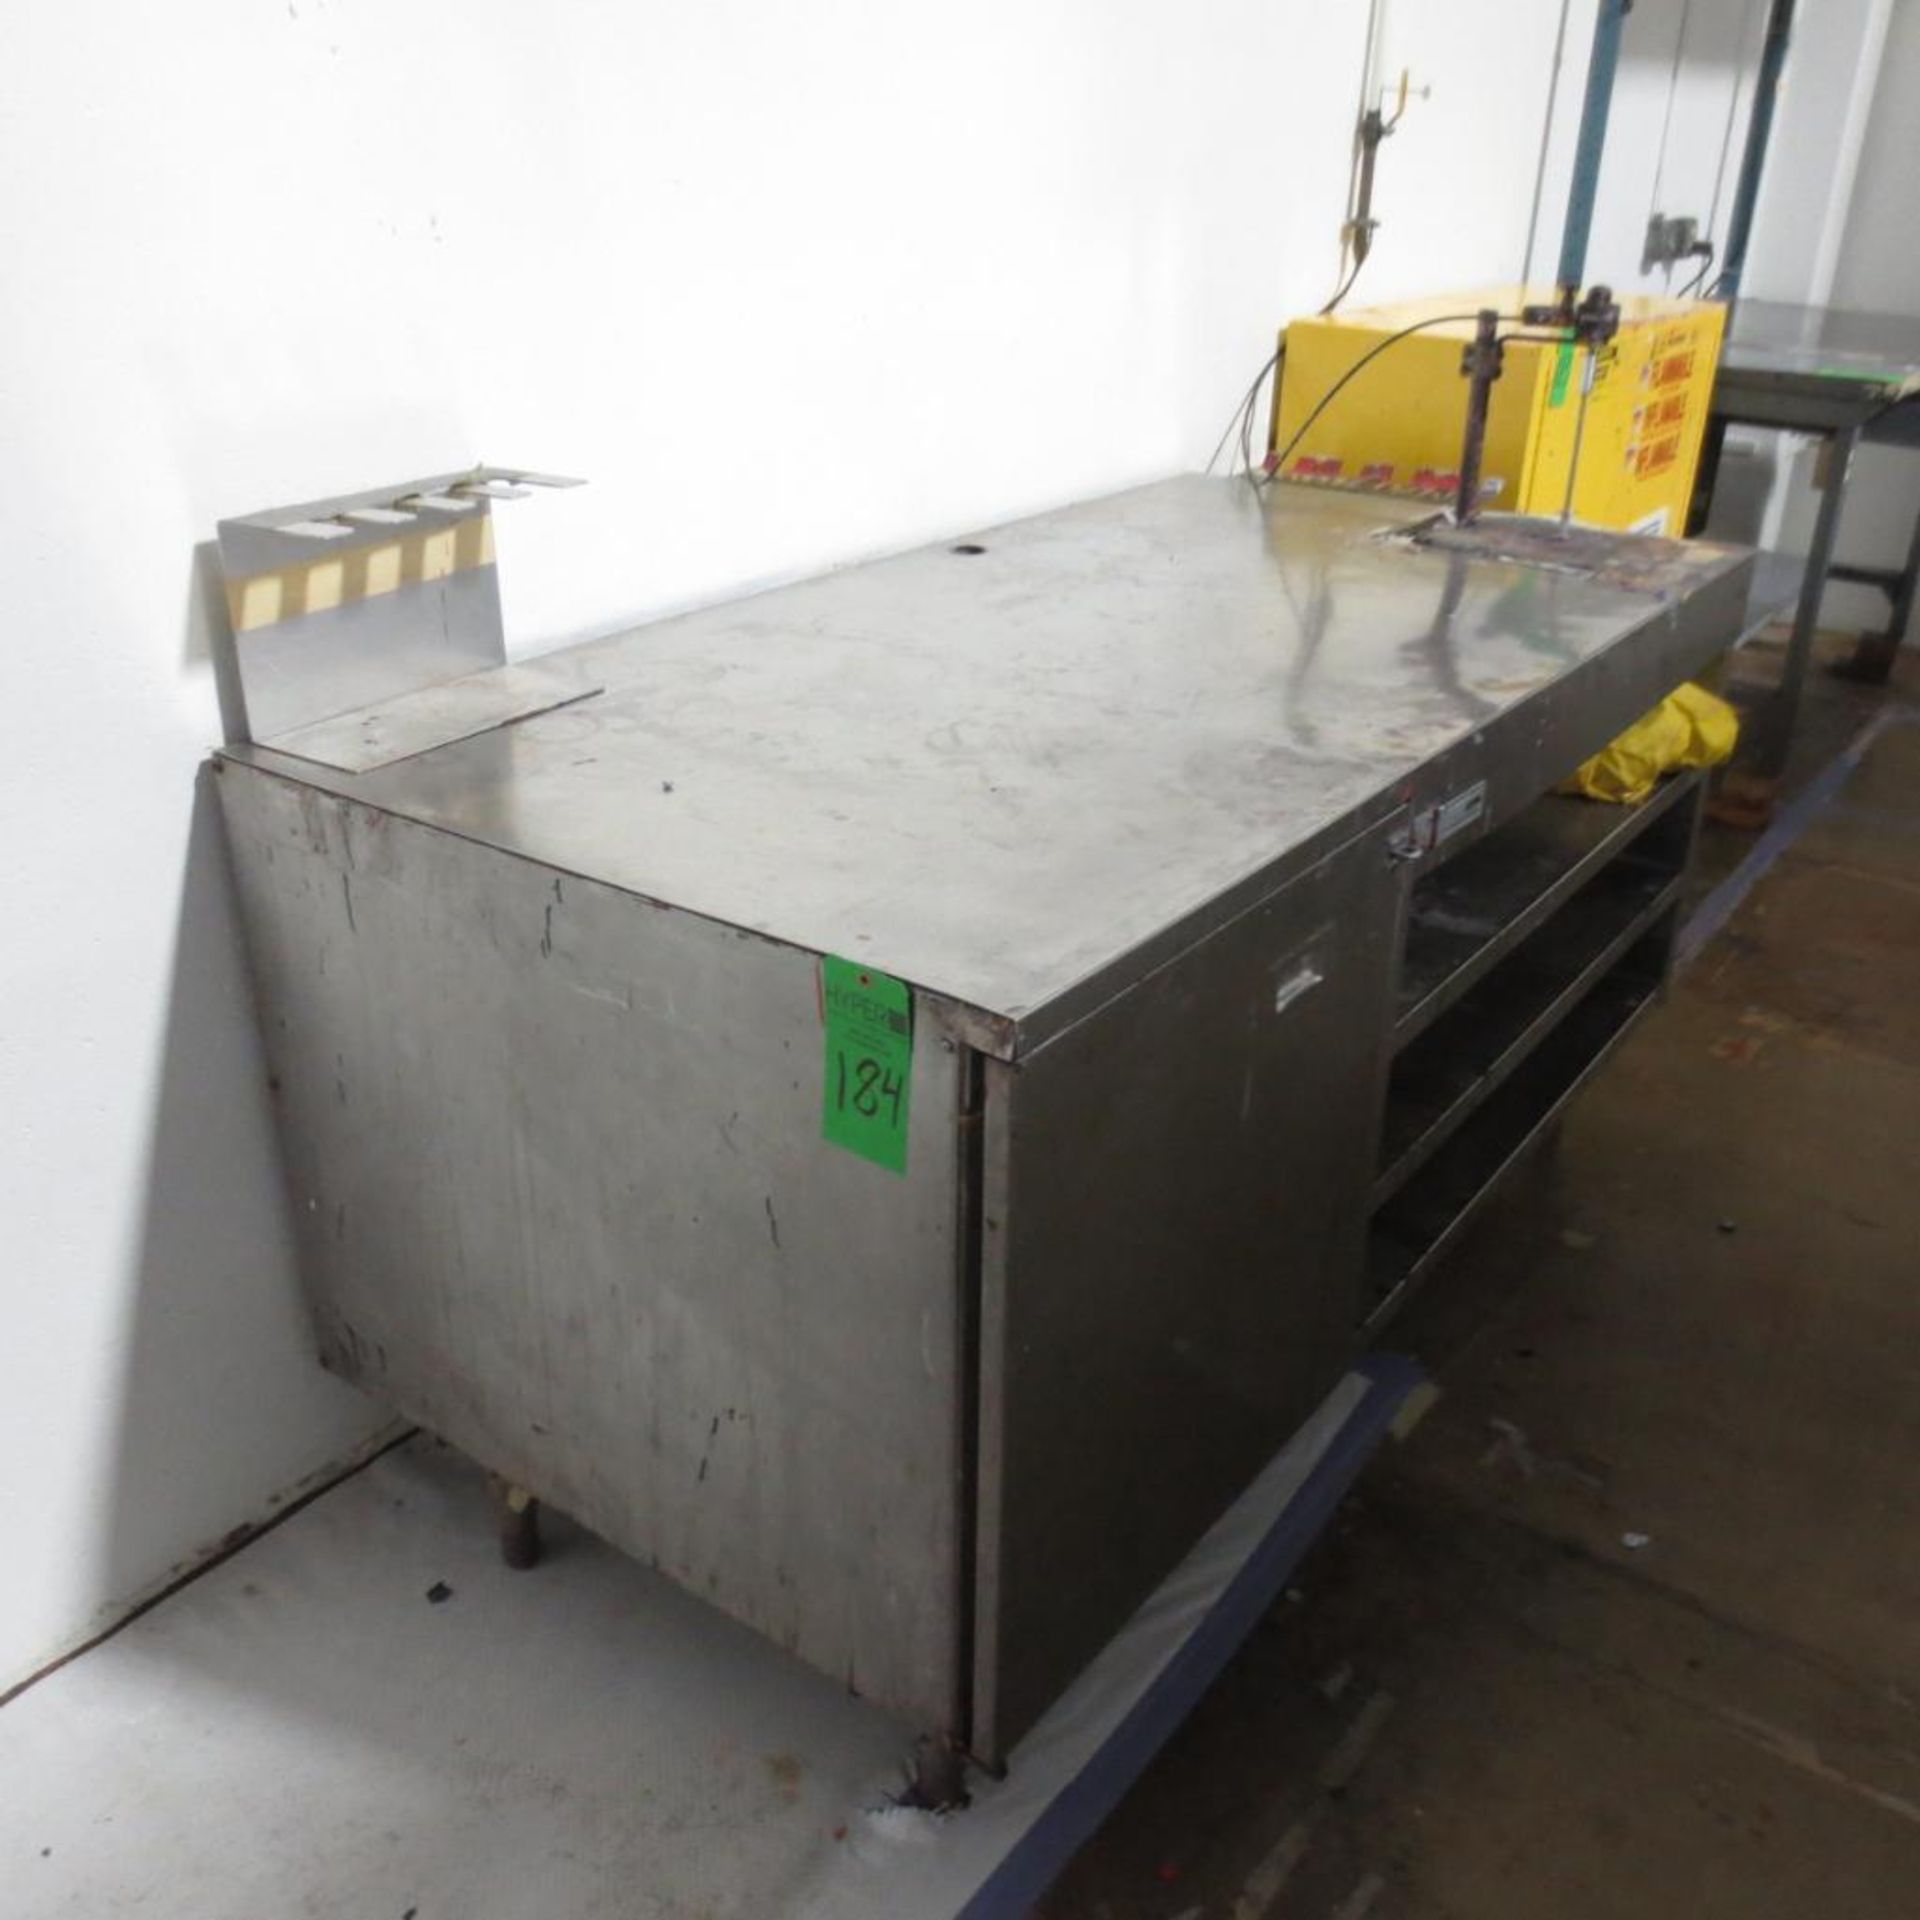 36" X 72" Mixing Table and 5' X 30" Work Bench.**Lot Located at 2395 Dakota Drive, Grafton, WI 53024 - Image 2 of 2